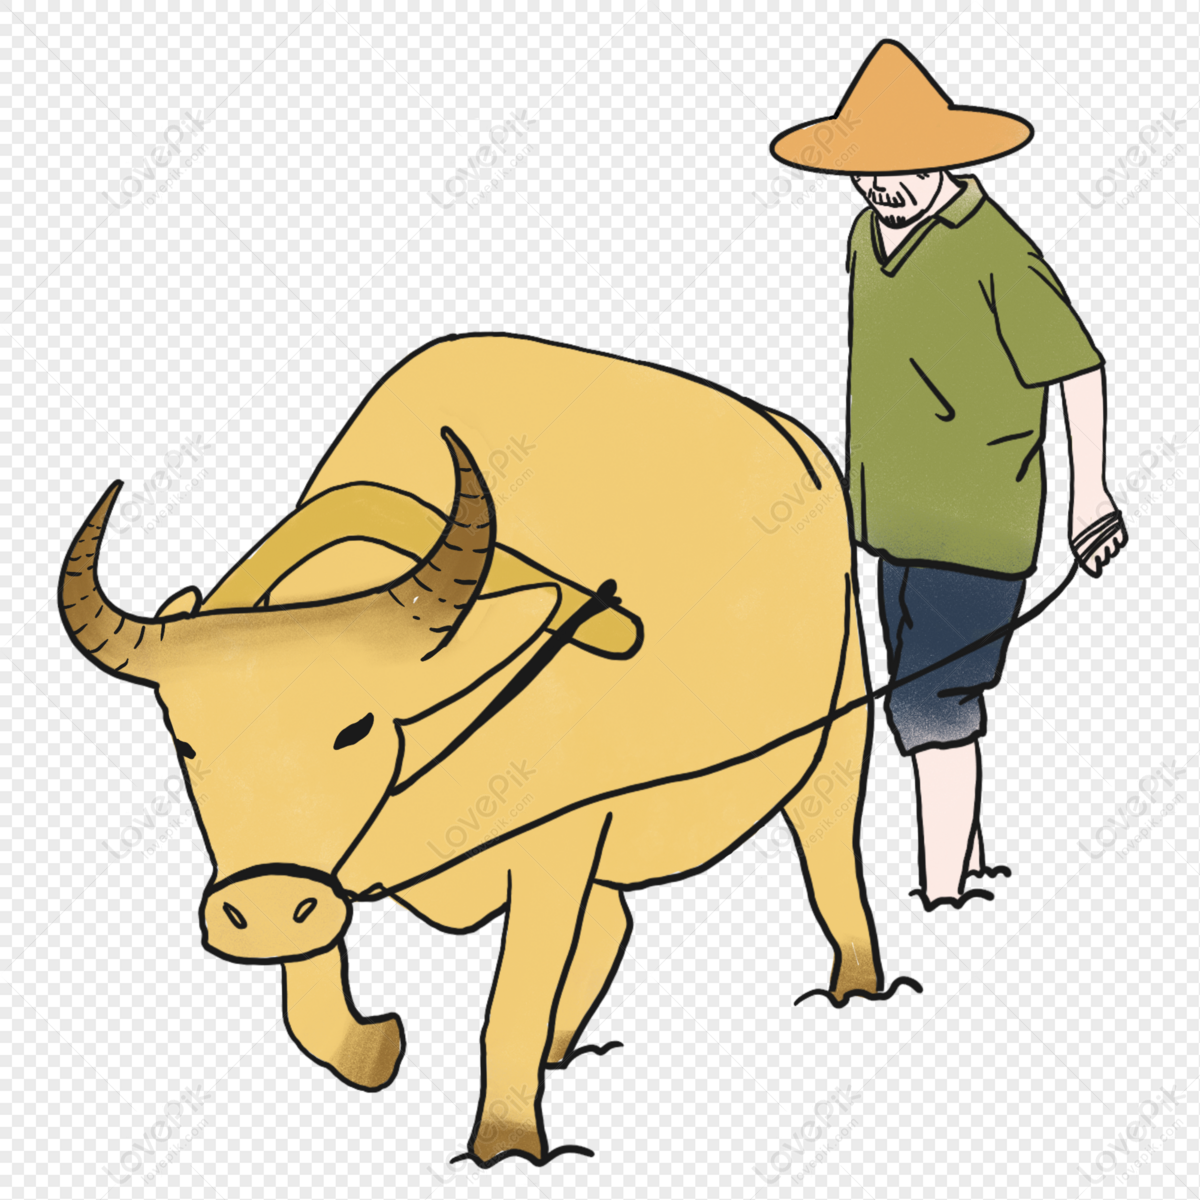 Cattle And Old Man, Cartoon Man, Asian Man, Man Thai PNG Image And ...